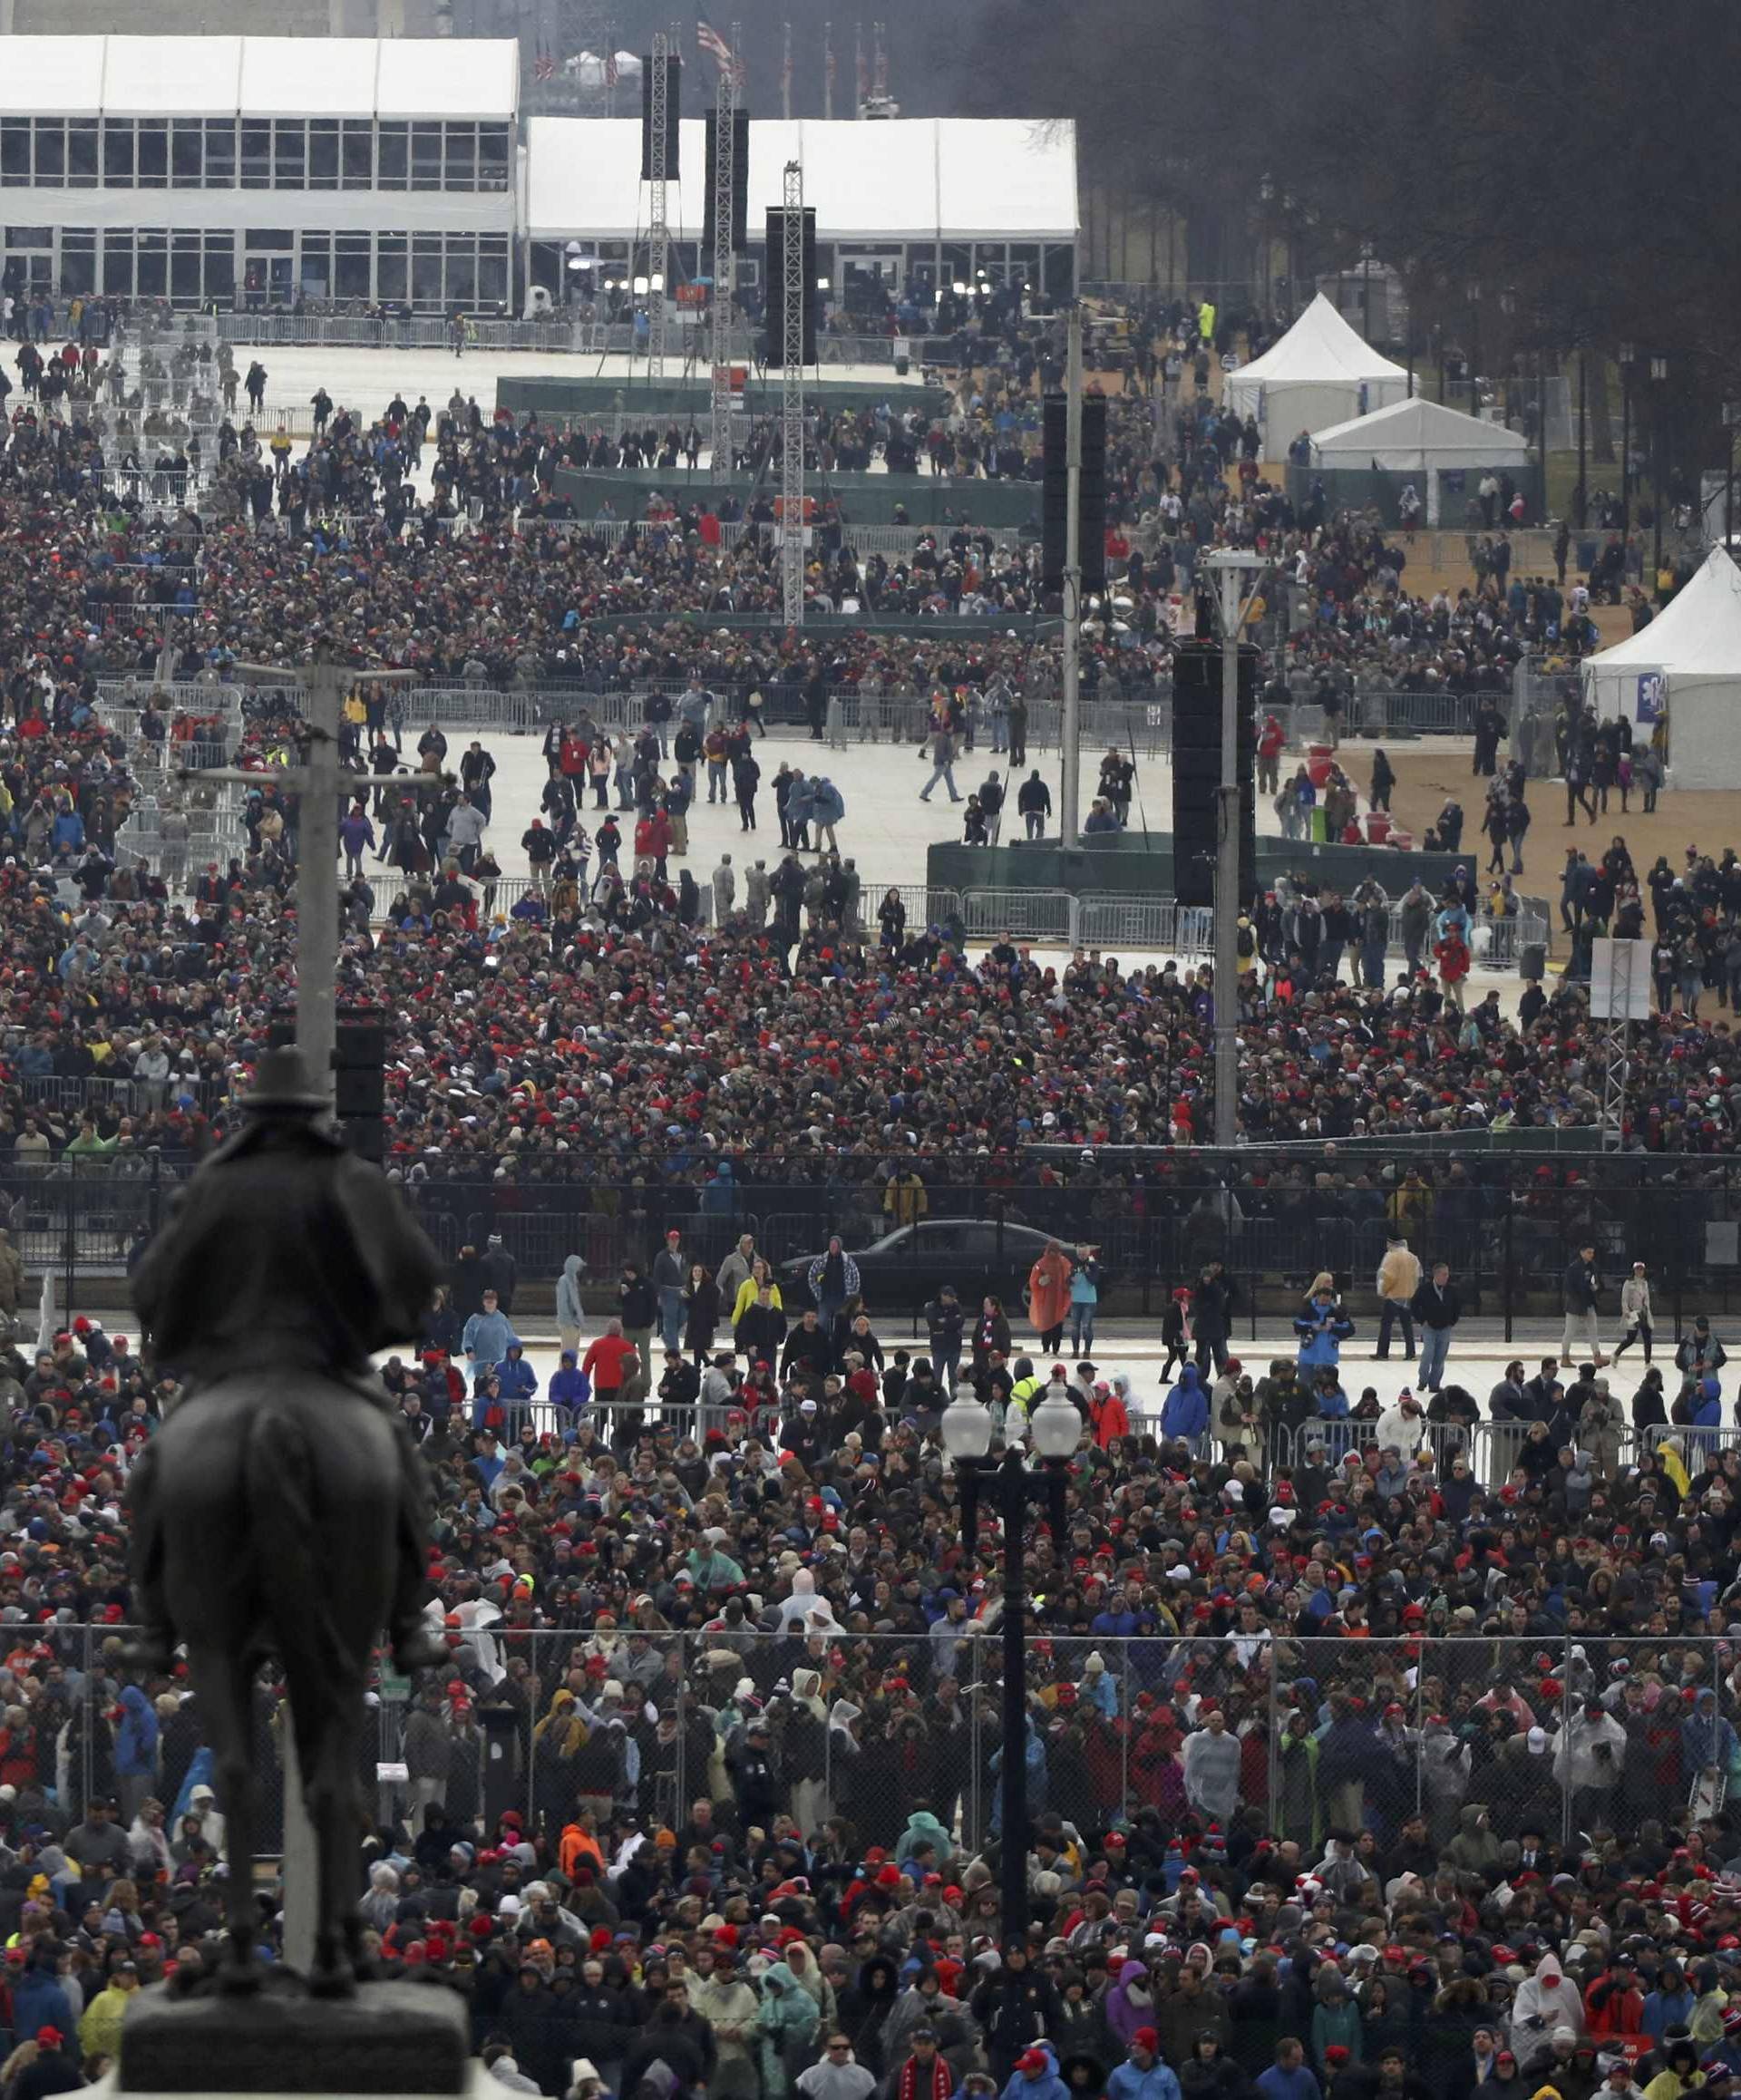 General view of attendees at the presidential inauguration of President-elect Donald Trump at the U.S. Capitol in Washington